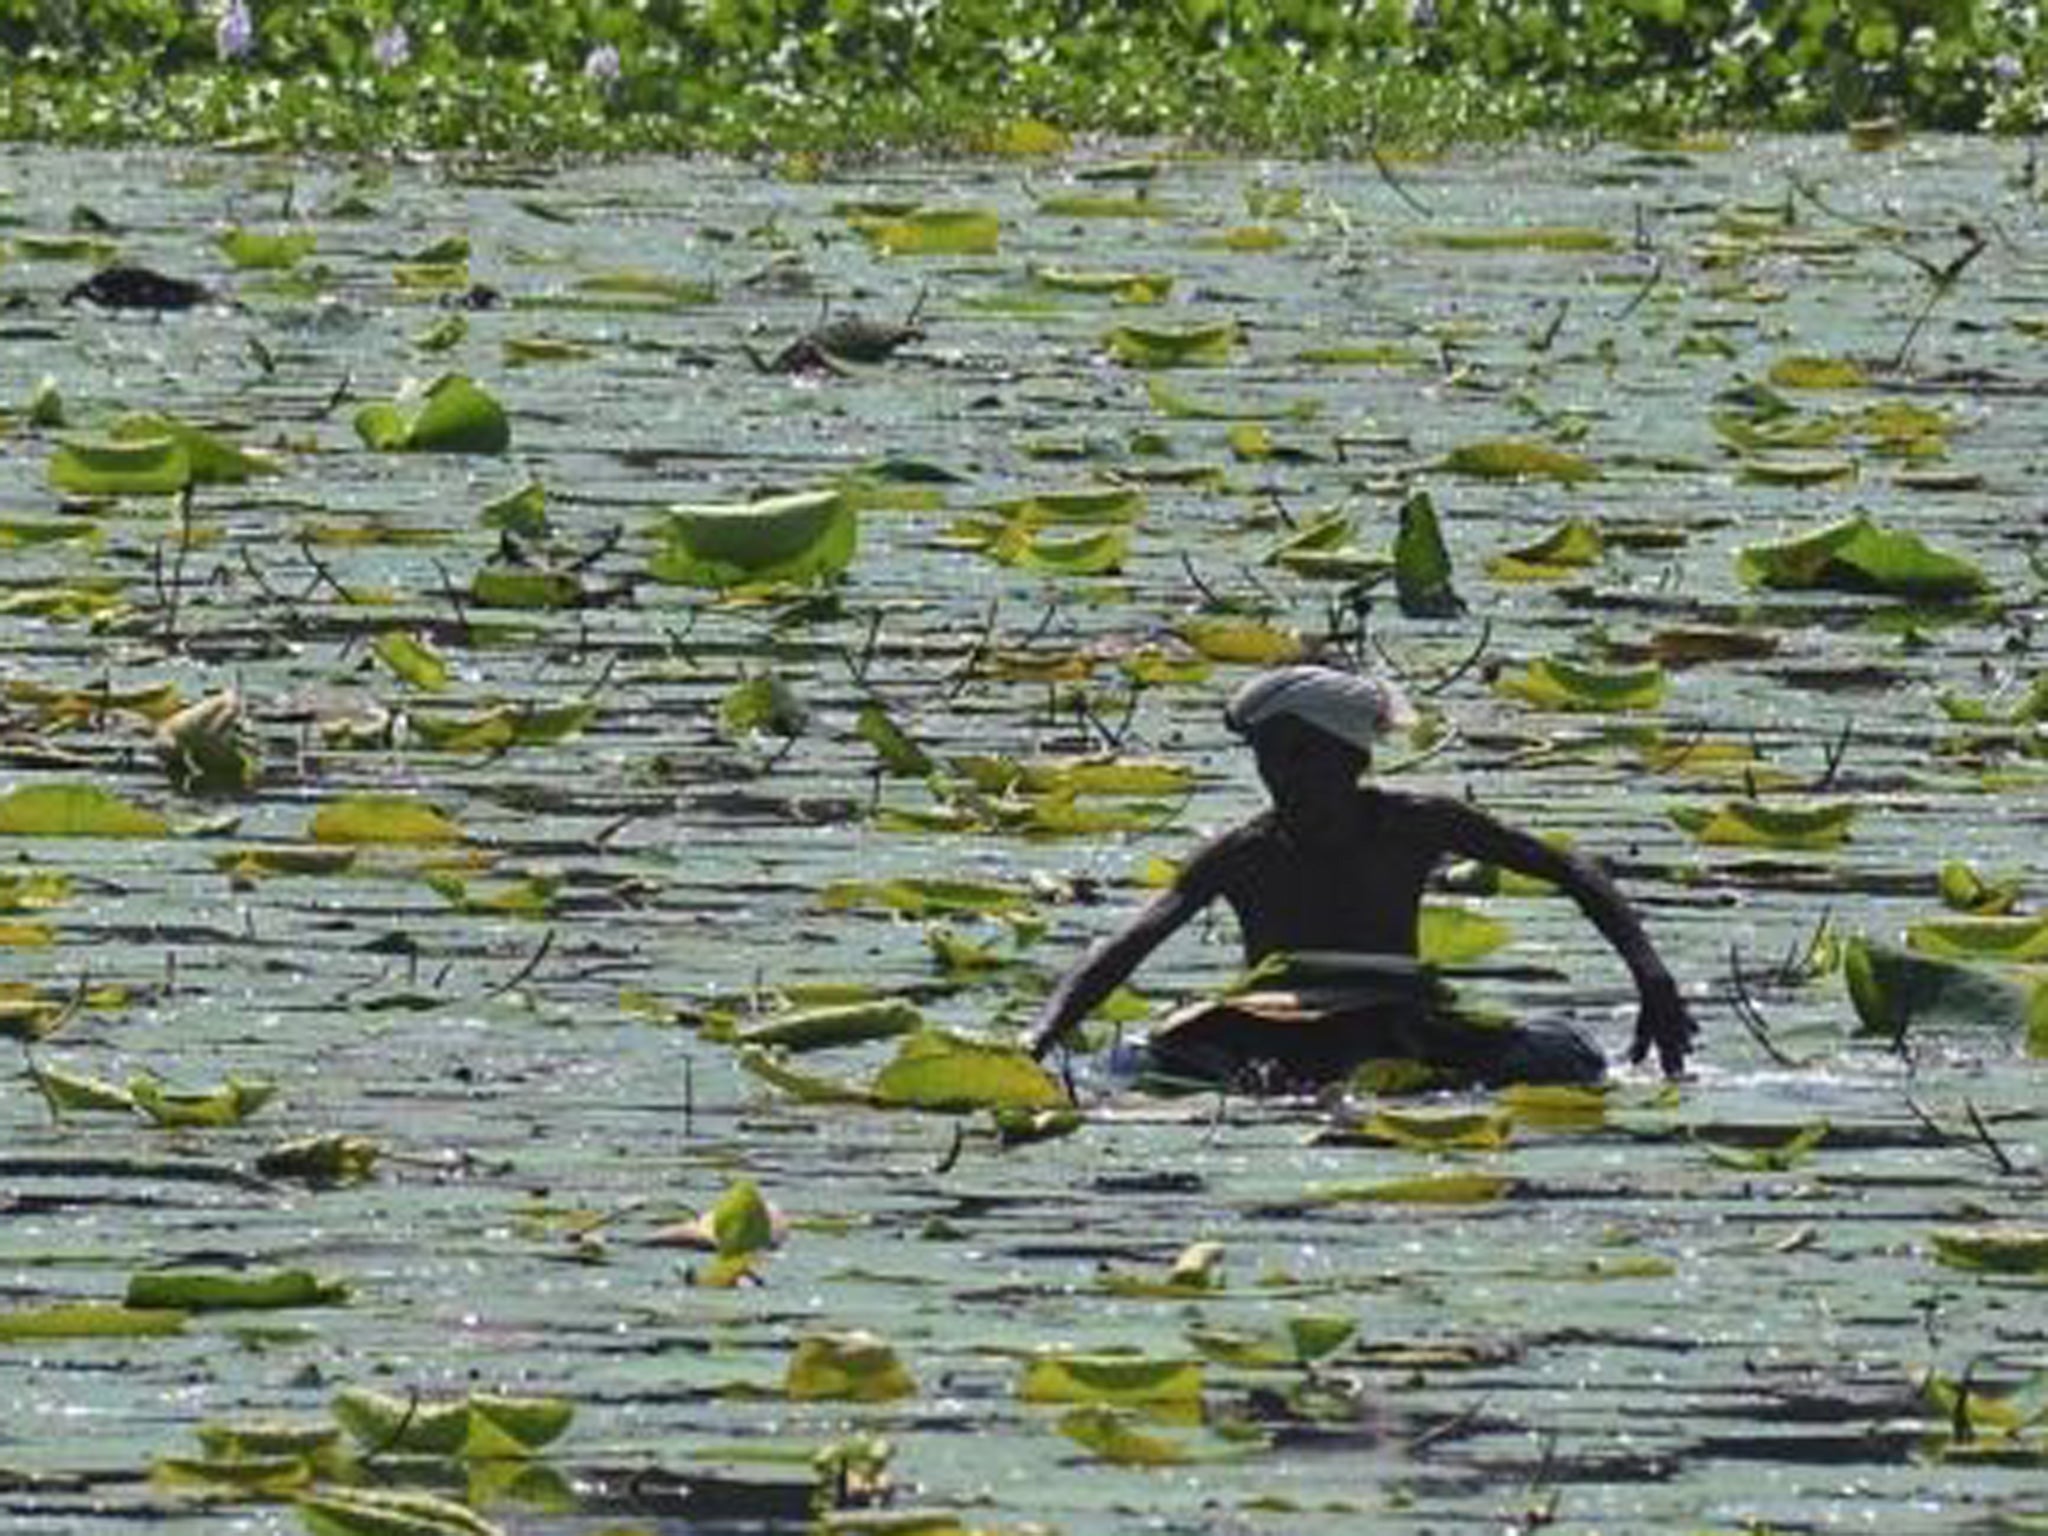 A man collects lotus leaves from an Indian pond - a scene now fraught with political implications